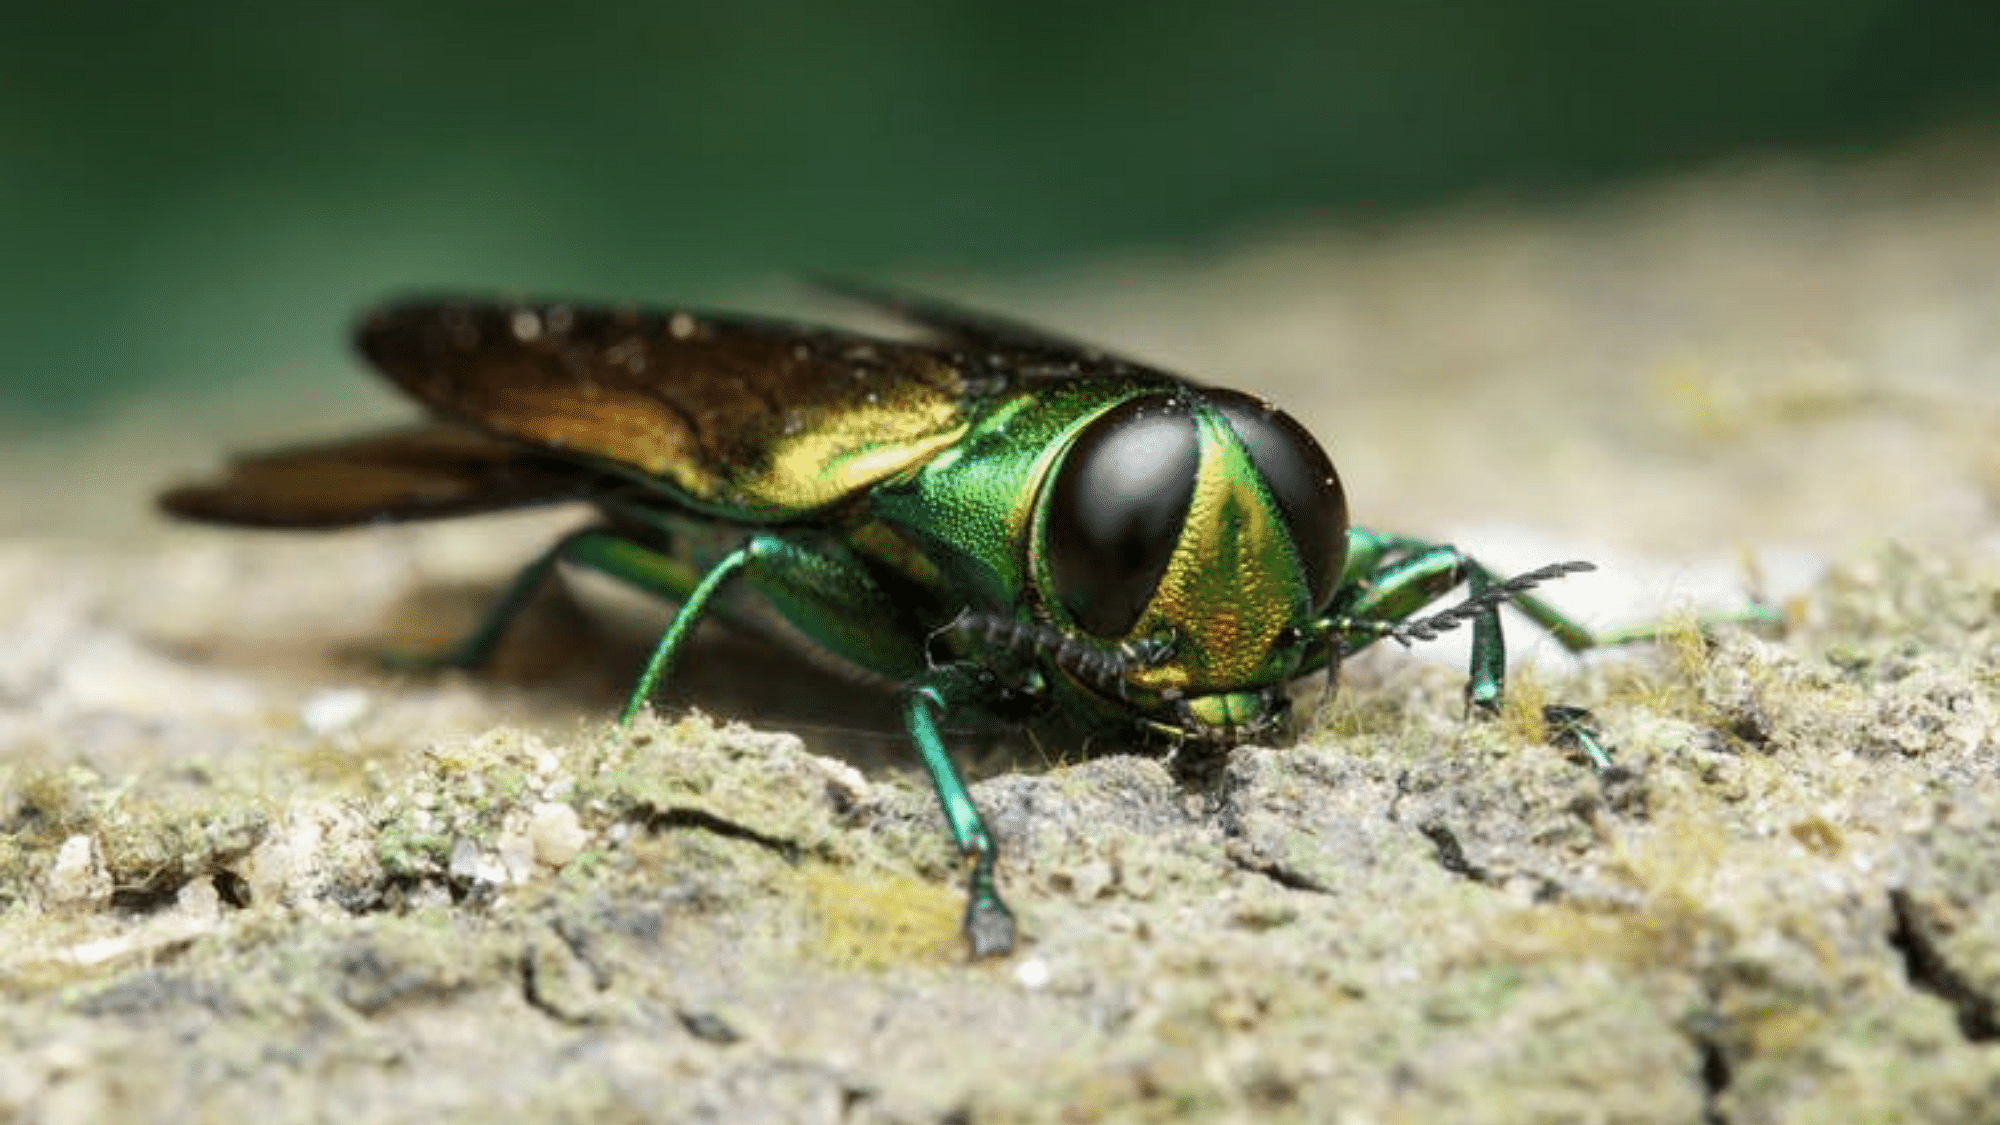 The emerald ash borer is destroying ash trees in 31 states.